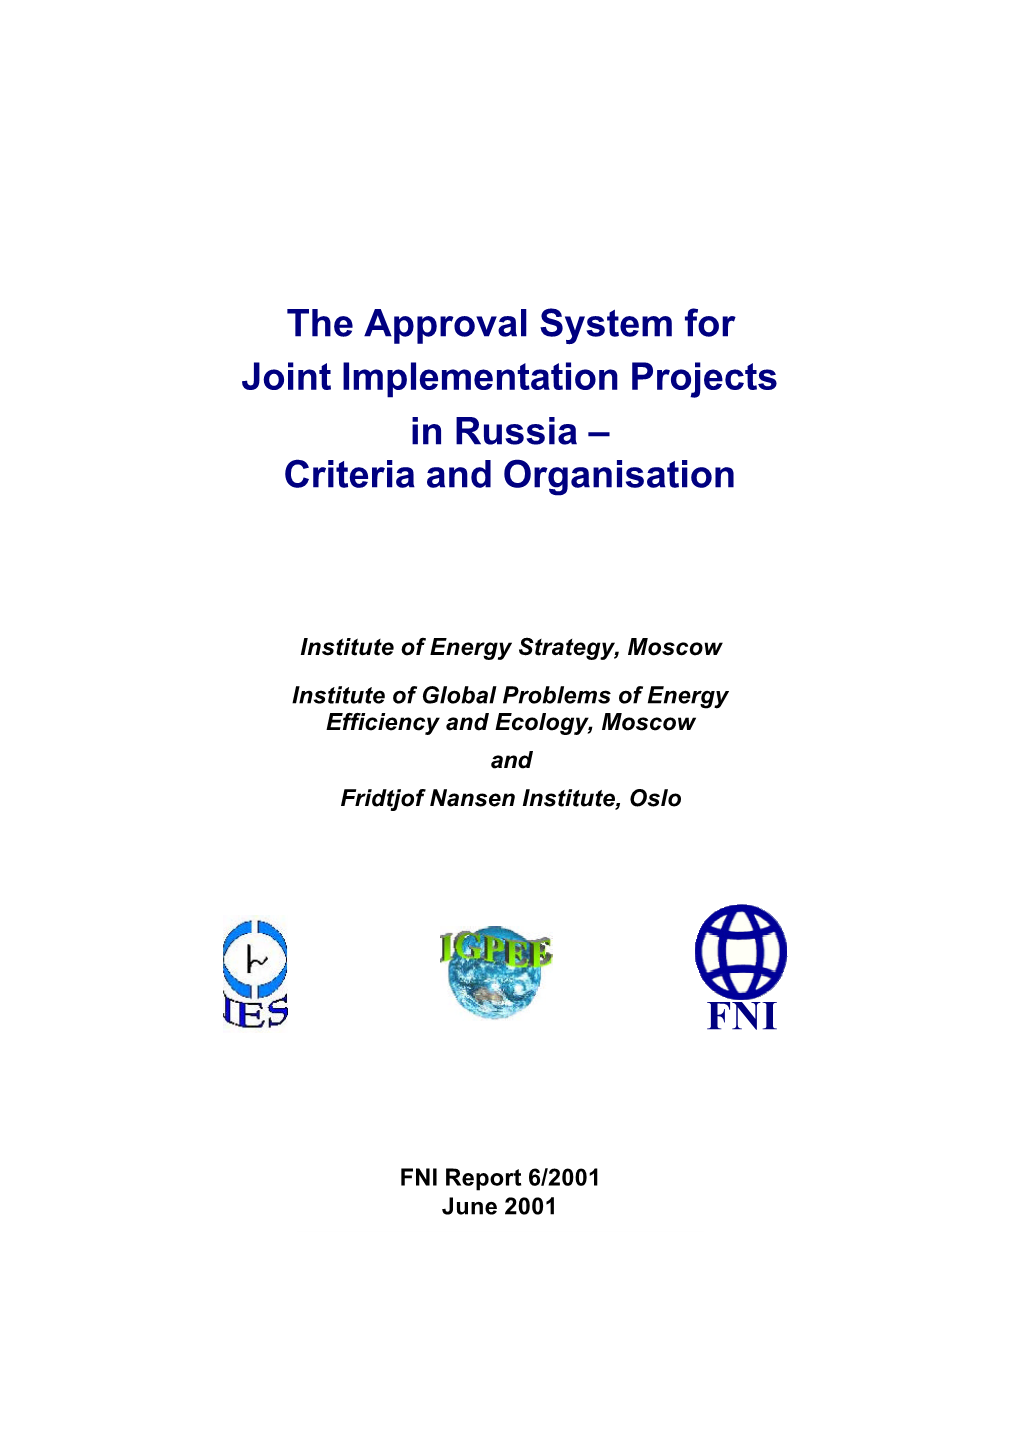 The Approval System for Joint Implementation Projects in Russia – Criteria and Organisation